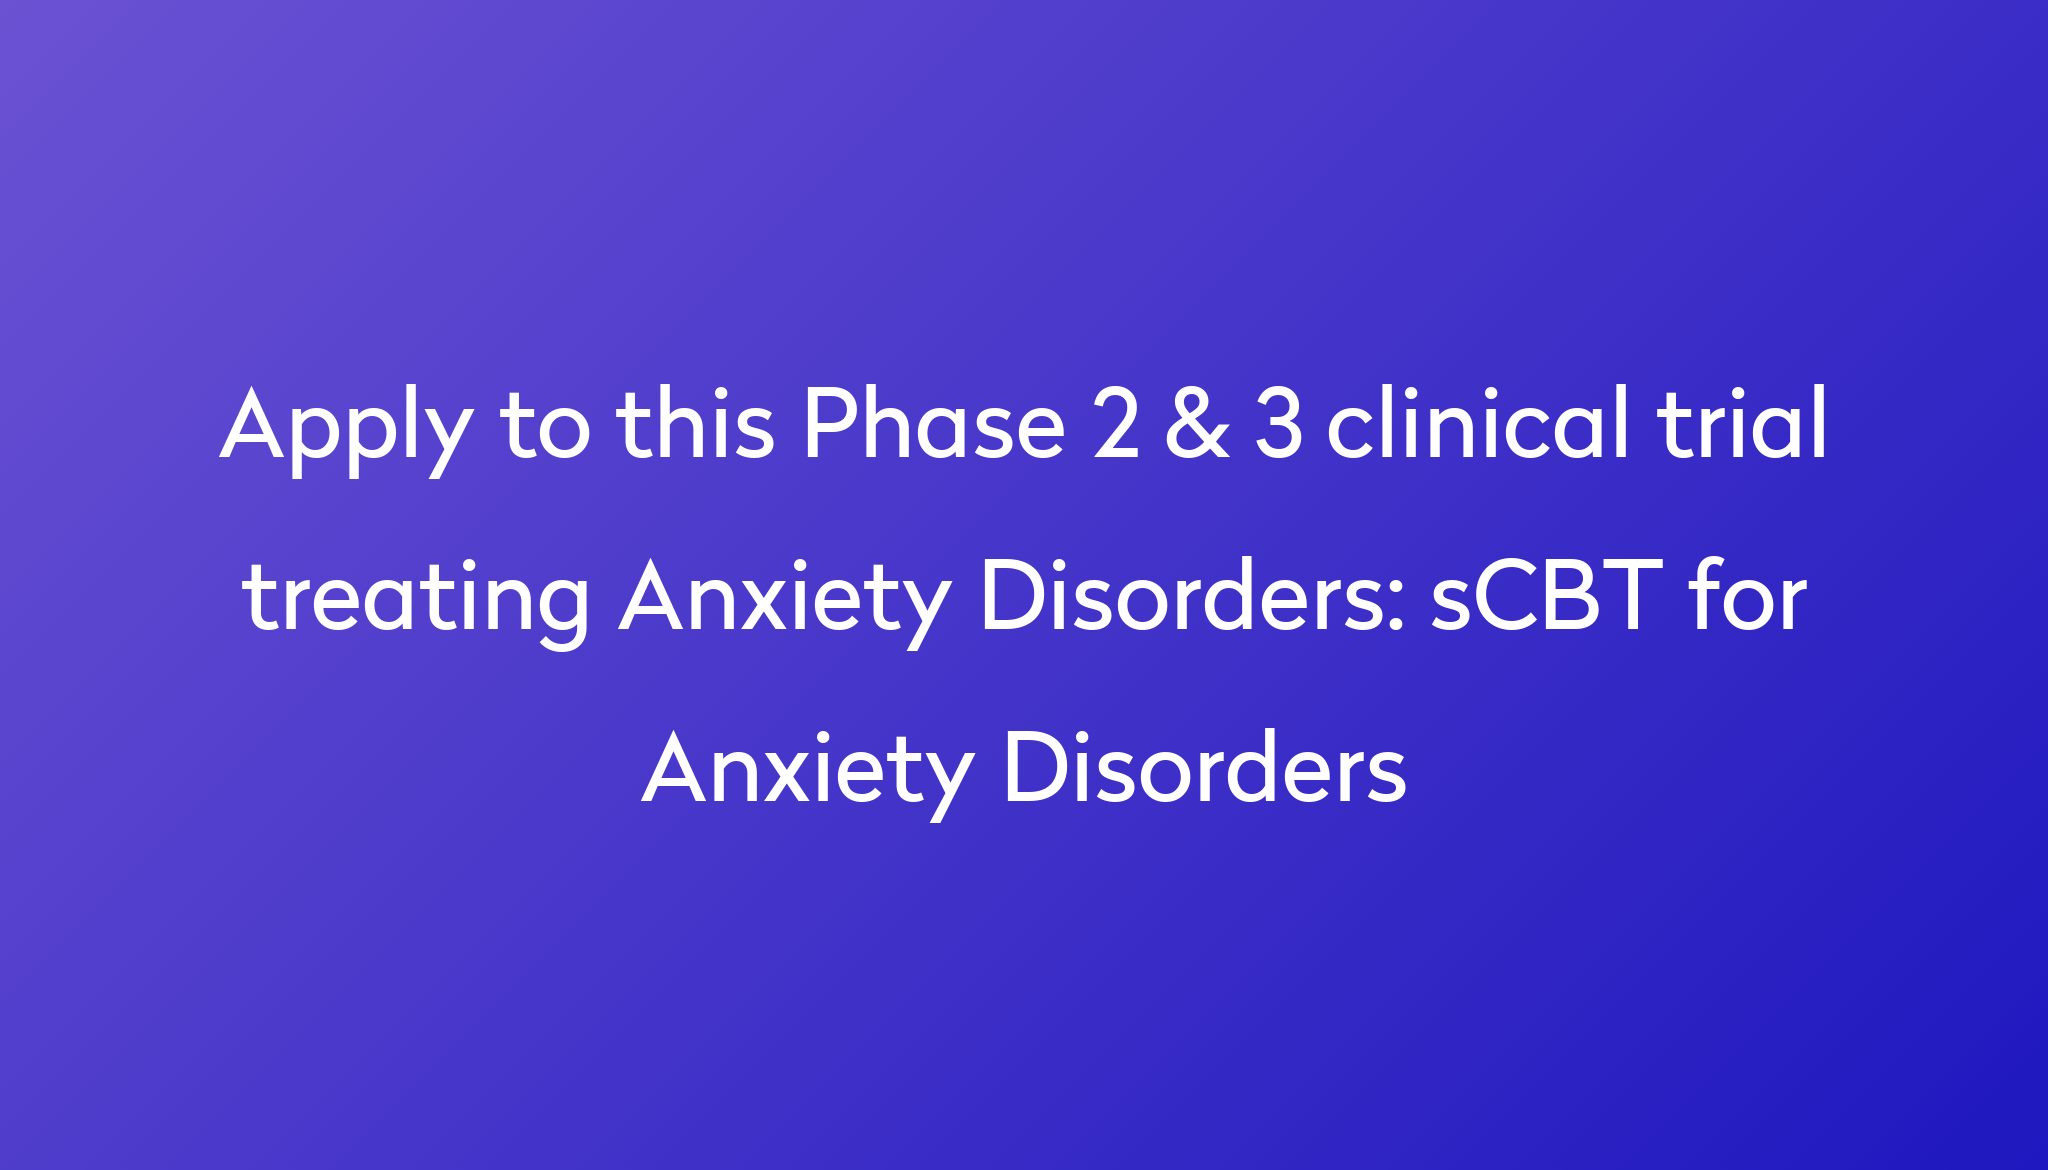 scbt-for-anxiety-disorders-clinical-trial-2023-power